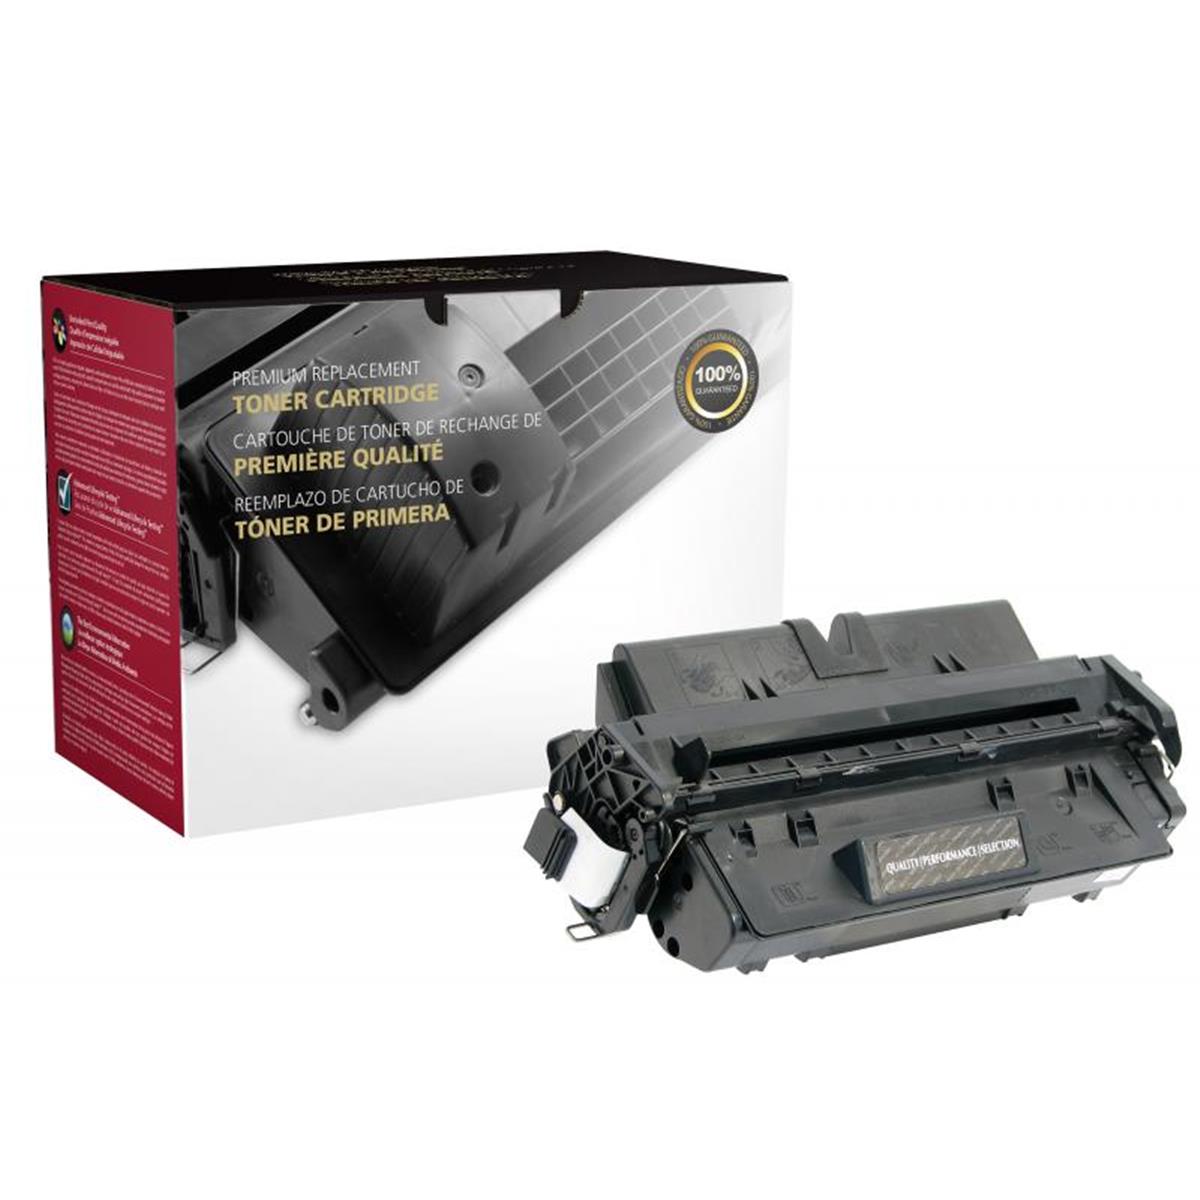 Picture of Canon 200034 Toner Cartridge for 7621A001AA-FX7